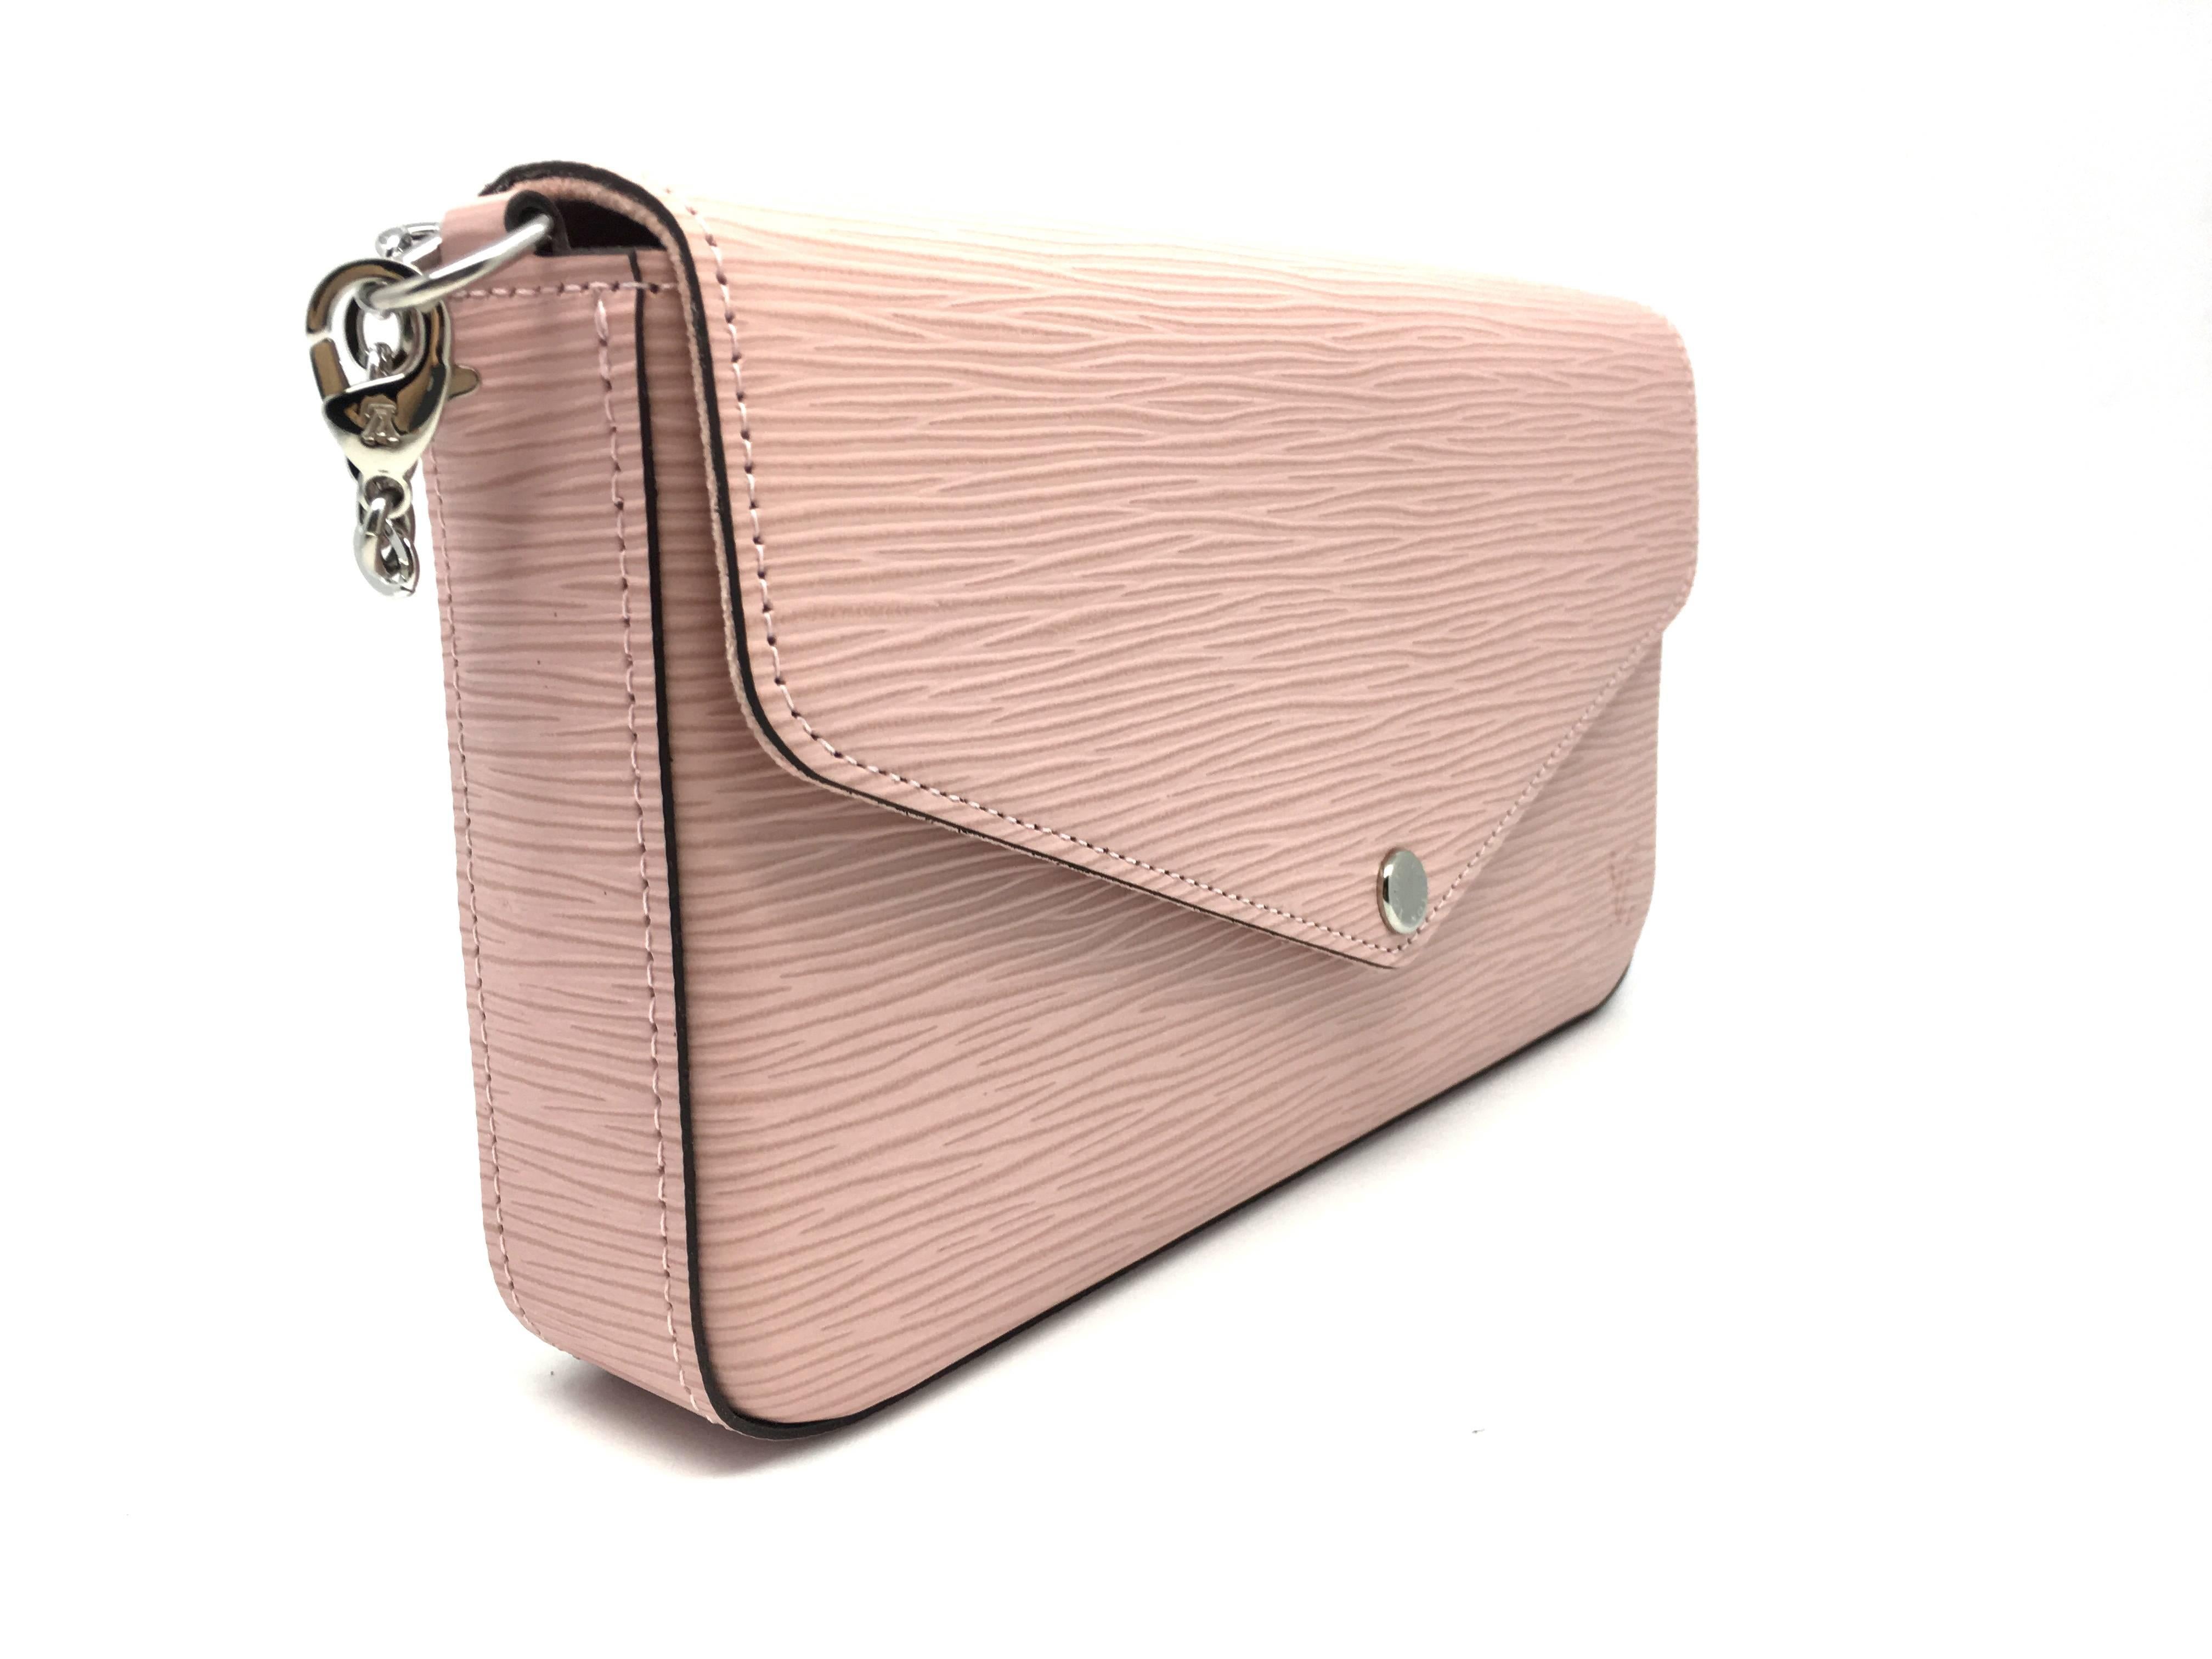 Color: Pink

Material: Epi

Condition: Rank N
Overall: Brand New, Not Used
Surface: Good
Corners: Good
Edges: Good
Handles/Straps: Good
Hardware: Good

Dimensions: W21 × H11 × D3cm（W8.2" × H4.3" × D1.1"）
Shoulder strap: